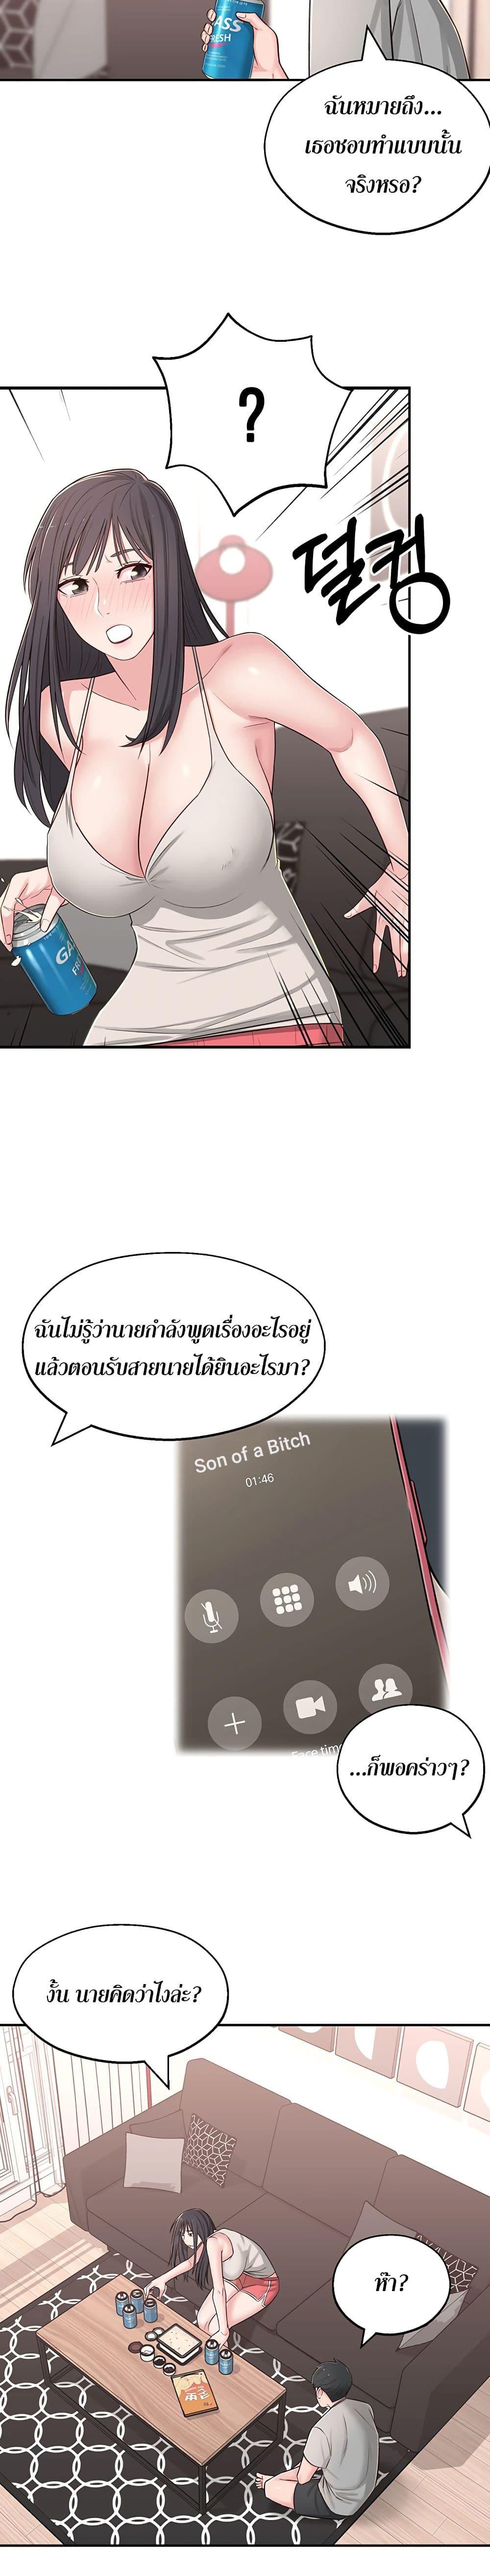 A Knowing Sister 5 ภาพ 18